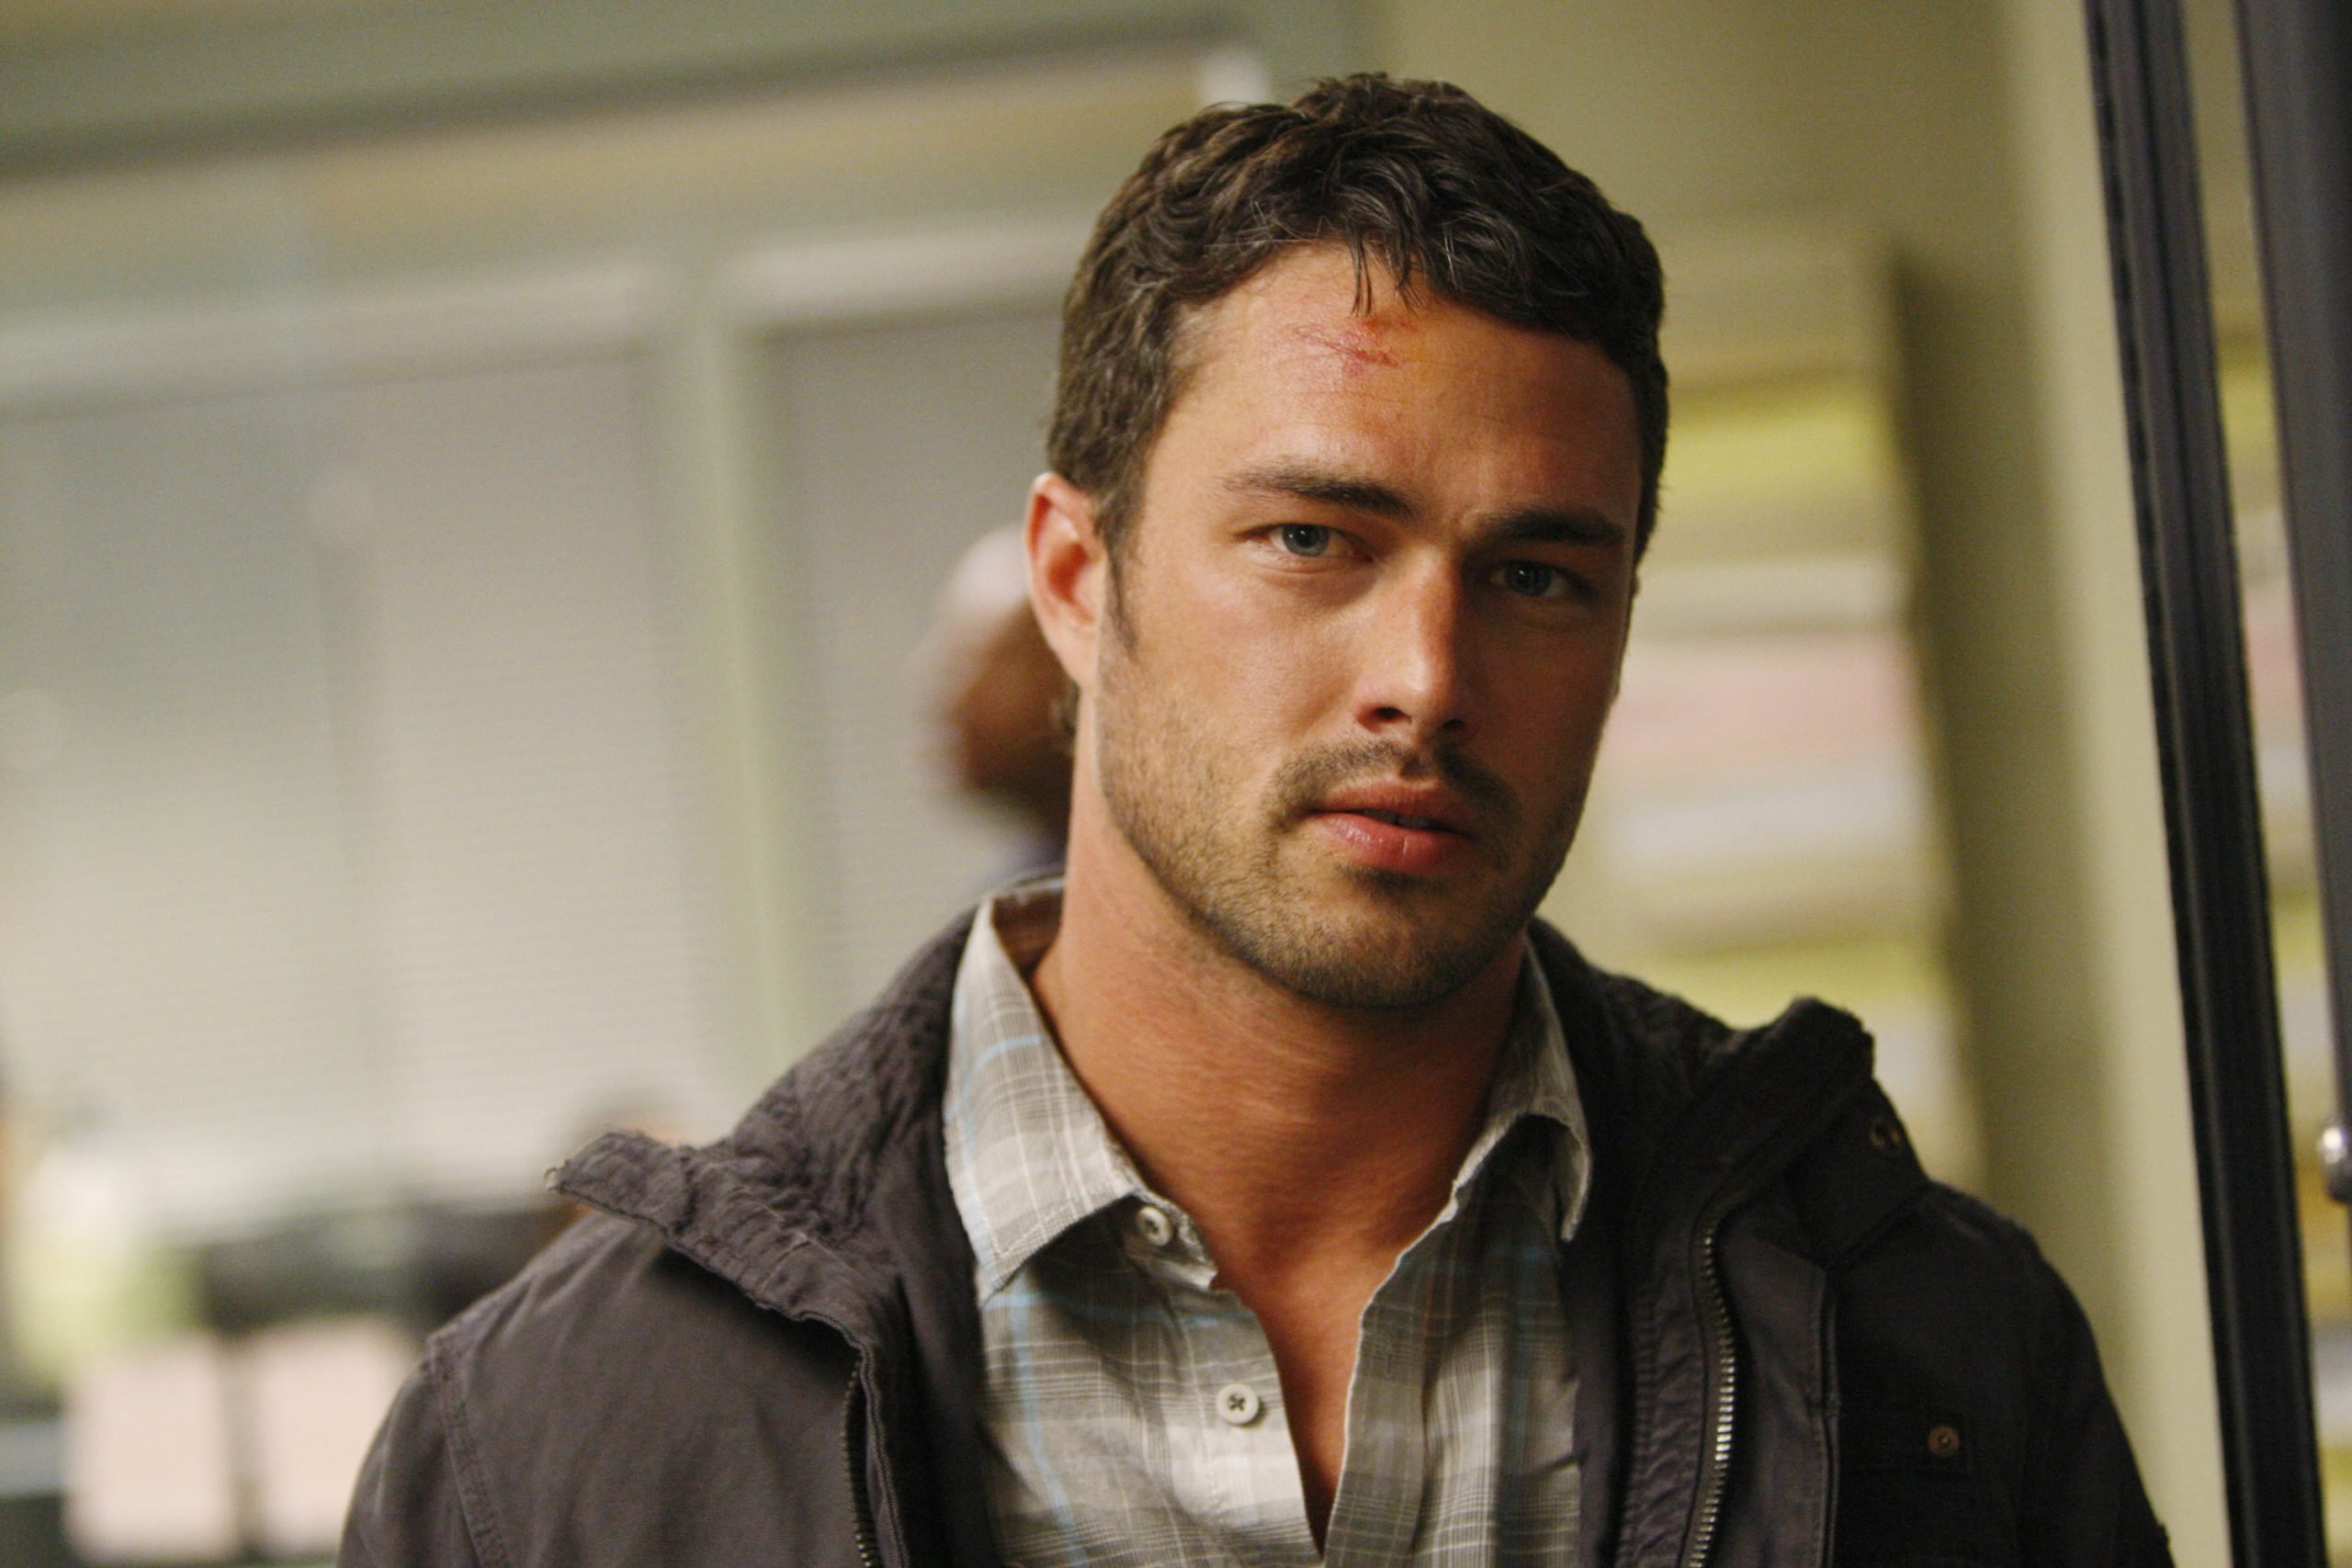 ‘Chicago Fire’ Taylor Kinney Net Worth and How He Became Famous